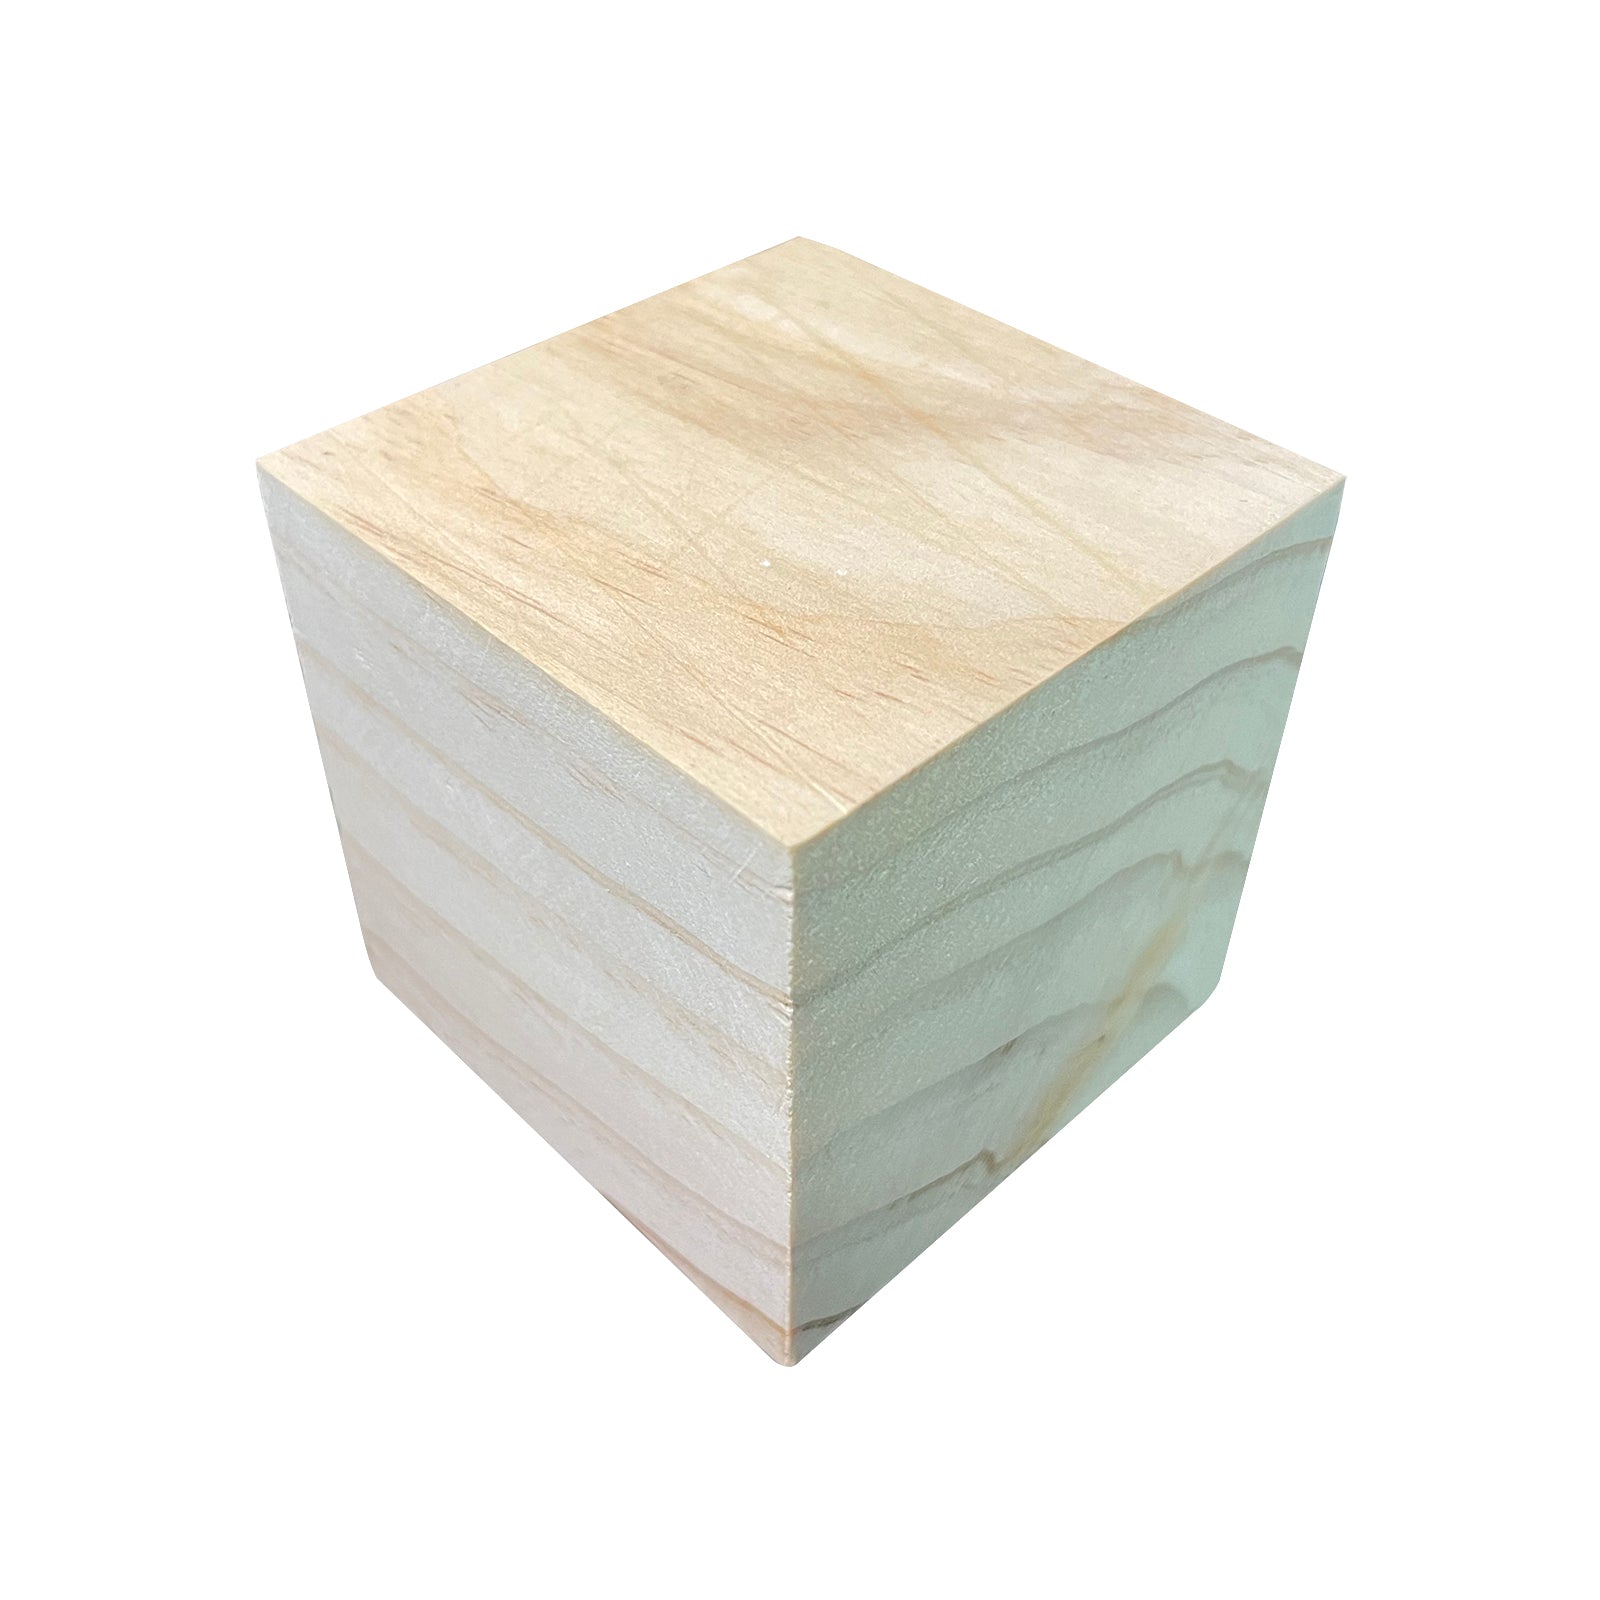 Wooden Cubes for Crafts – MIOUMEI